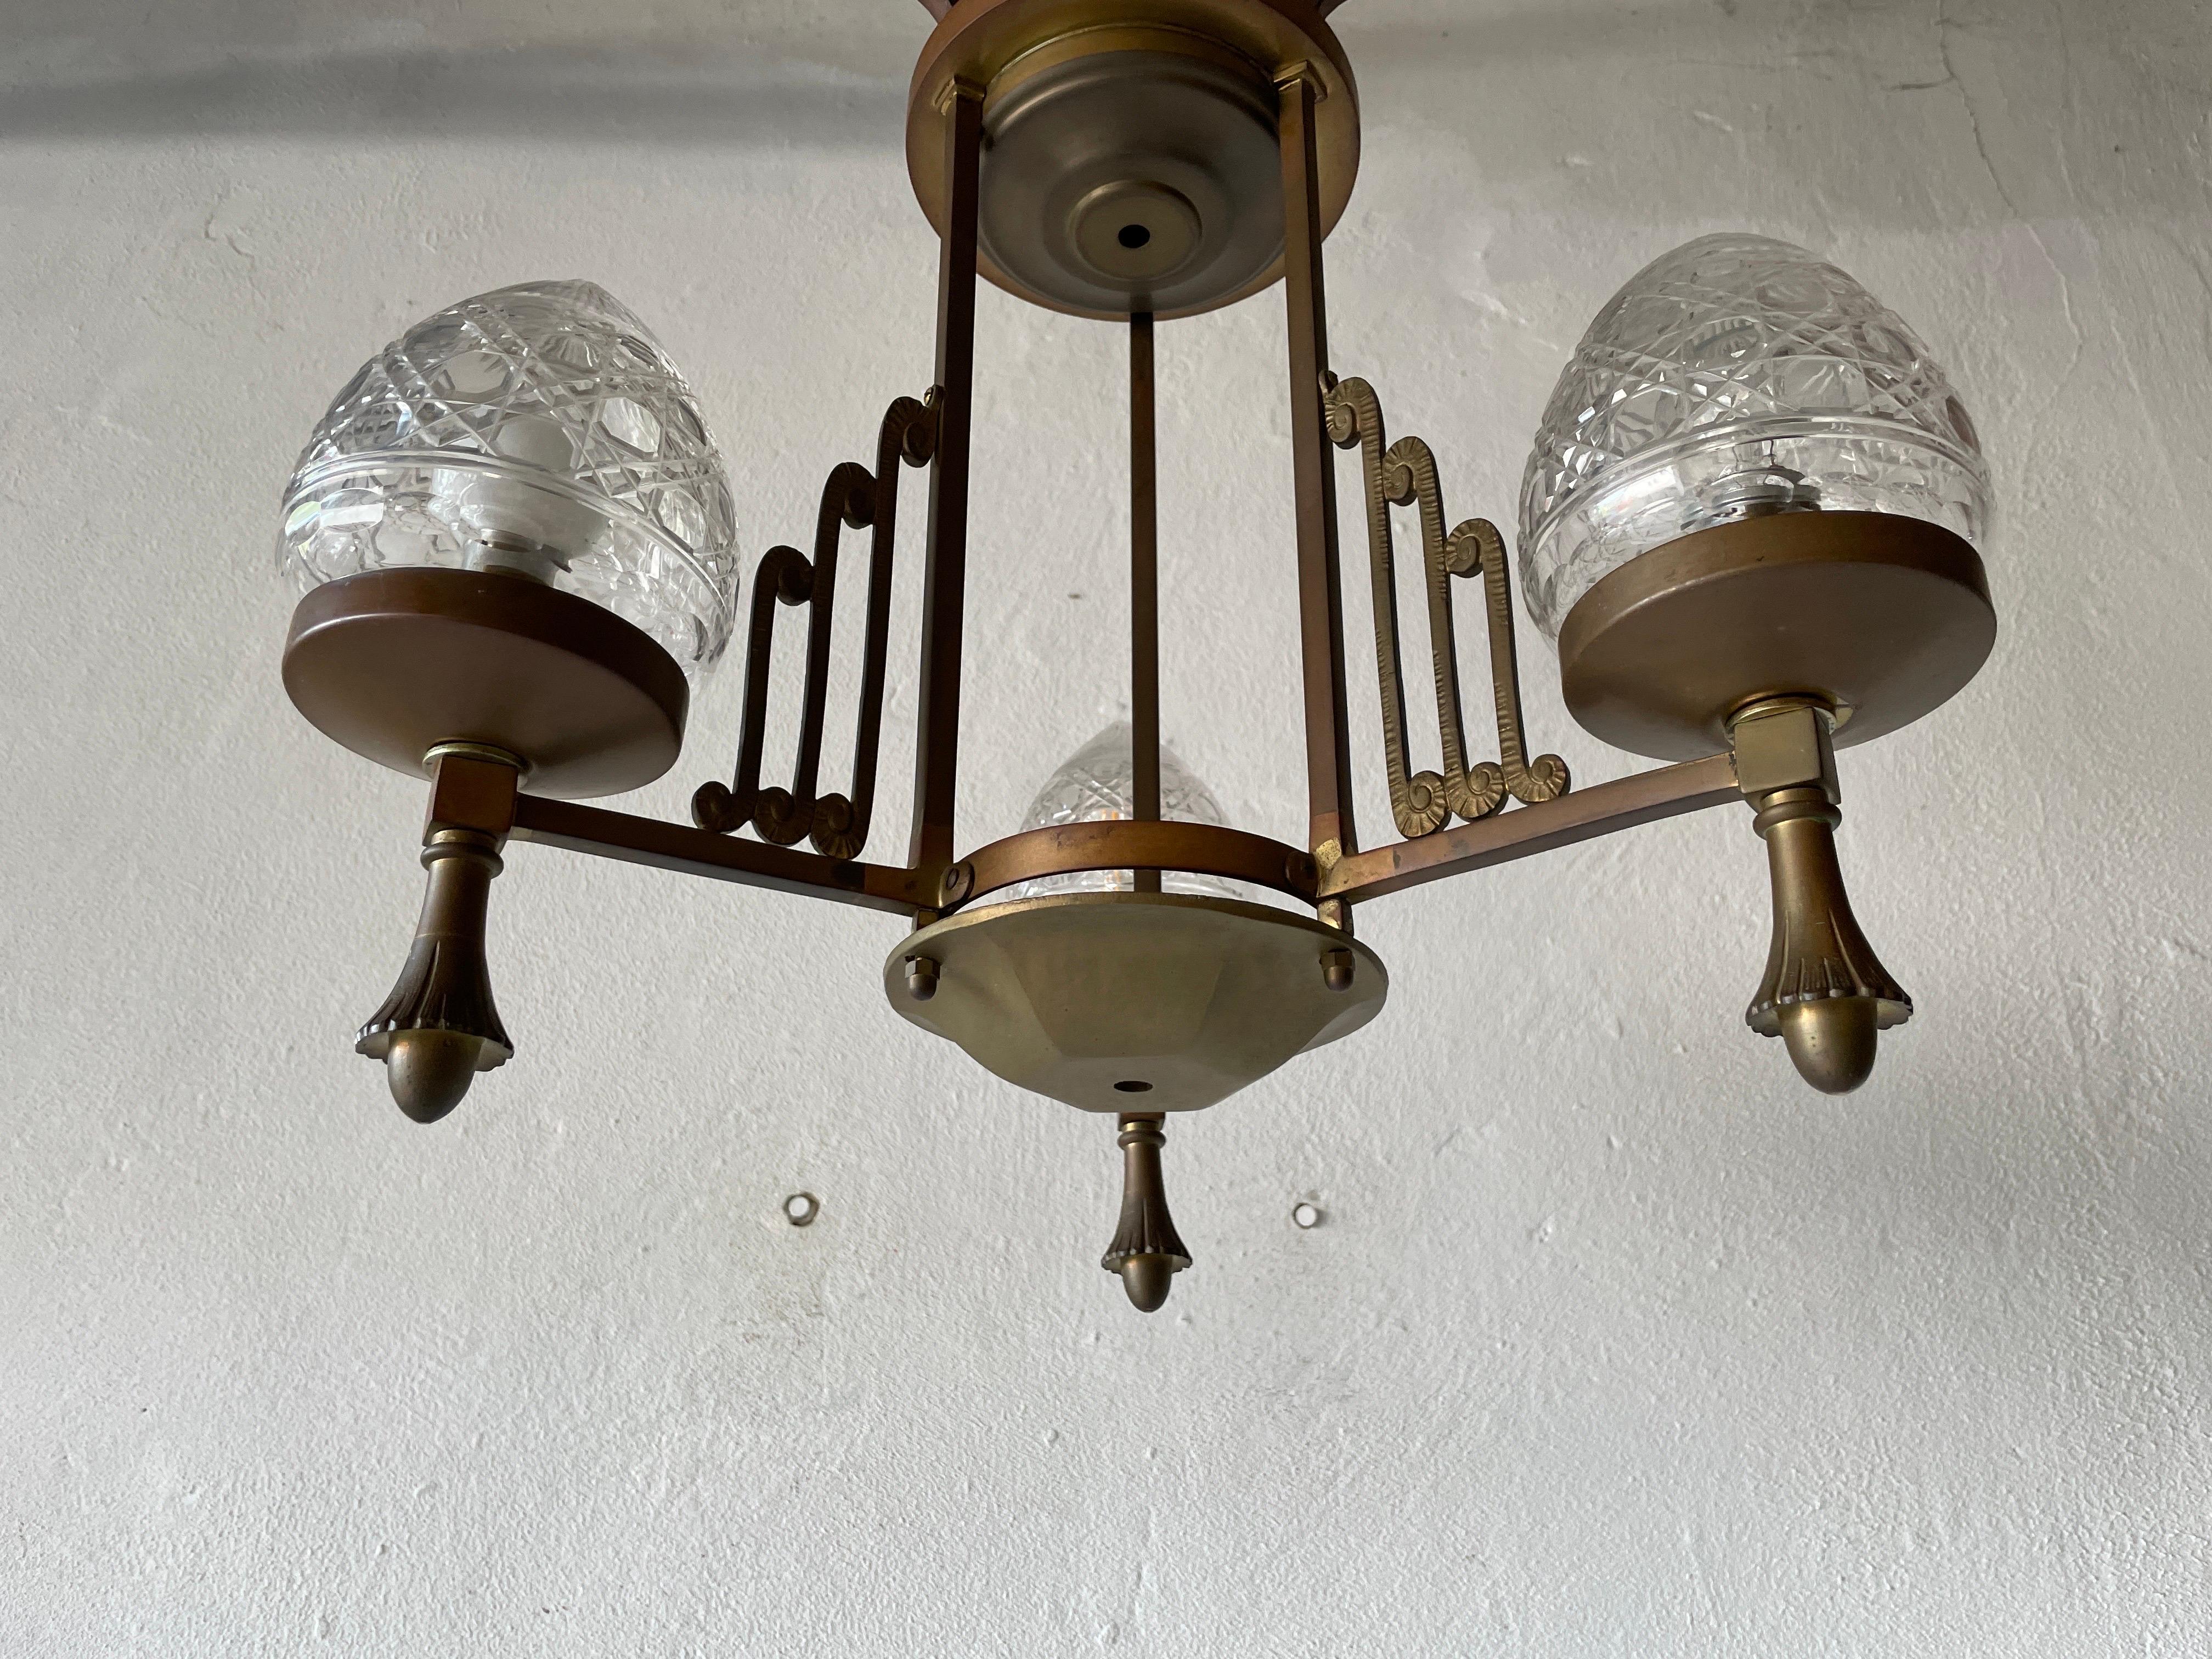 Unique French Copper Architectural Body Chandelier, 1940s, France In Good Condition For Sale In Hagenbach, DE